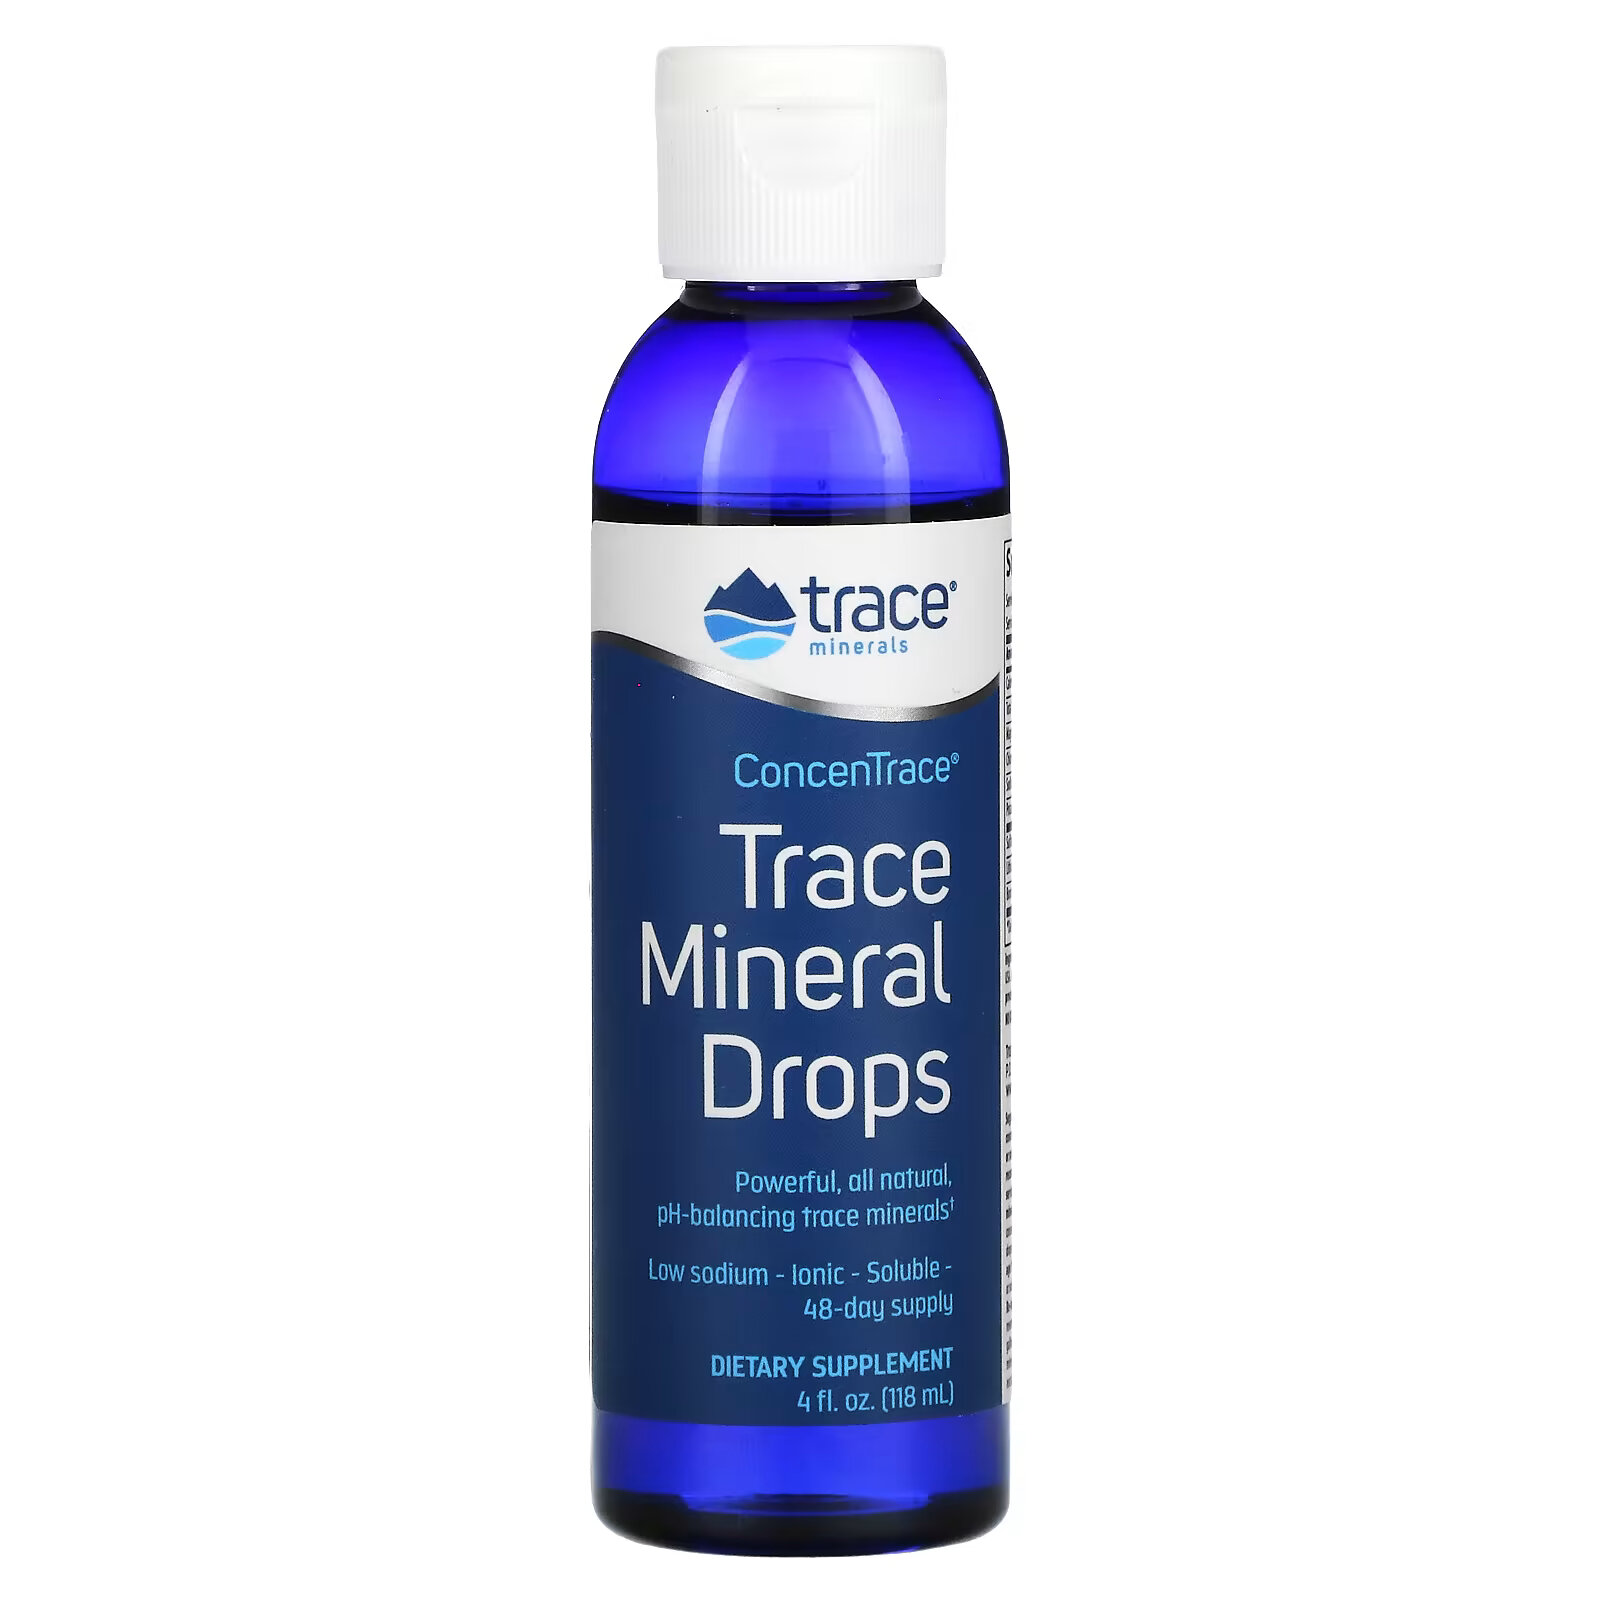 Trace Minerals ConcenTrace, капли с микроэлементами, 118 мл trace minerals ® concentrace микроэлементы в каплях 118 мл 4 жидк унции